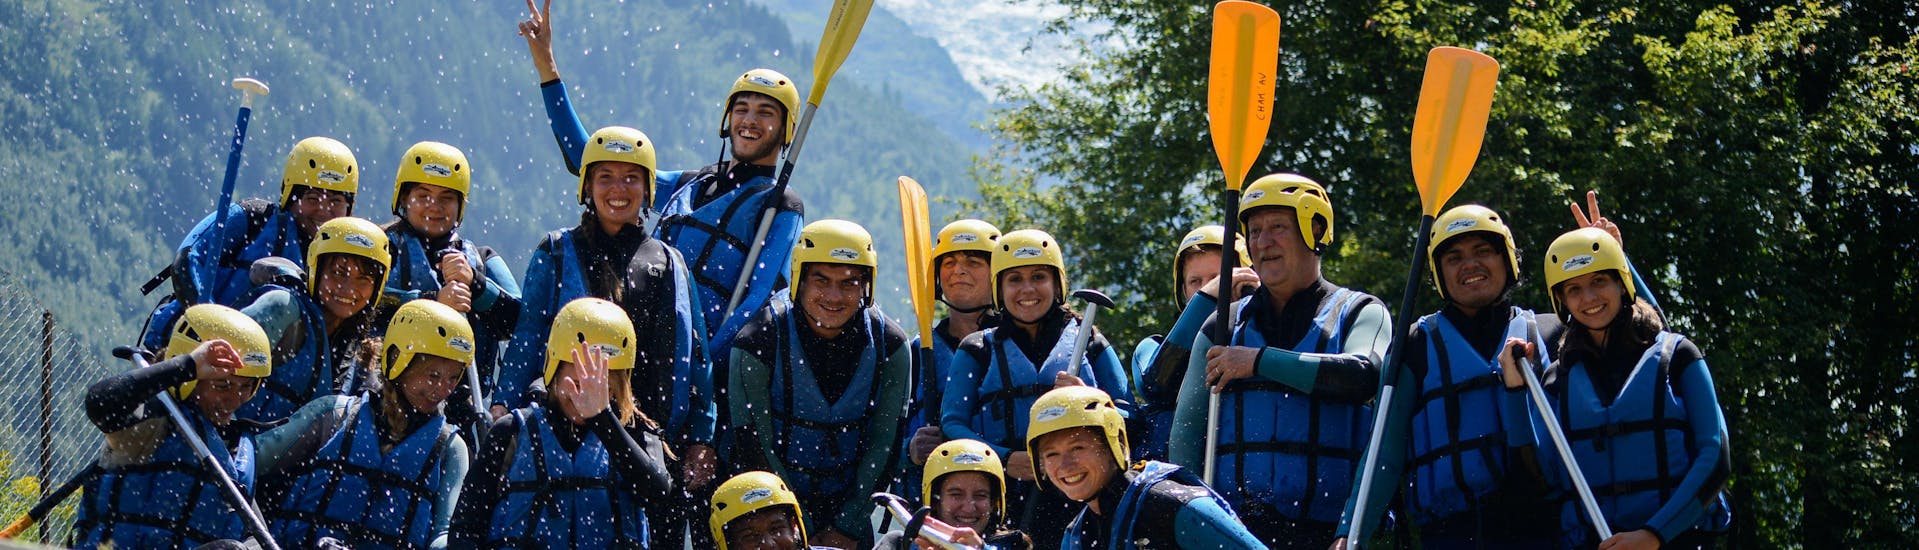 Rafting "Discovery" for Groups (20+ people) - Arve.